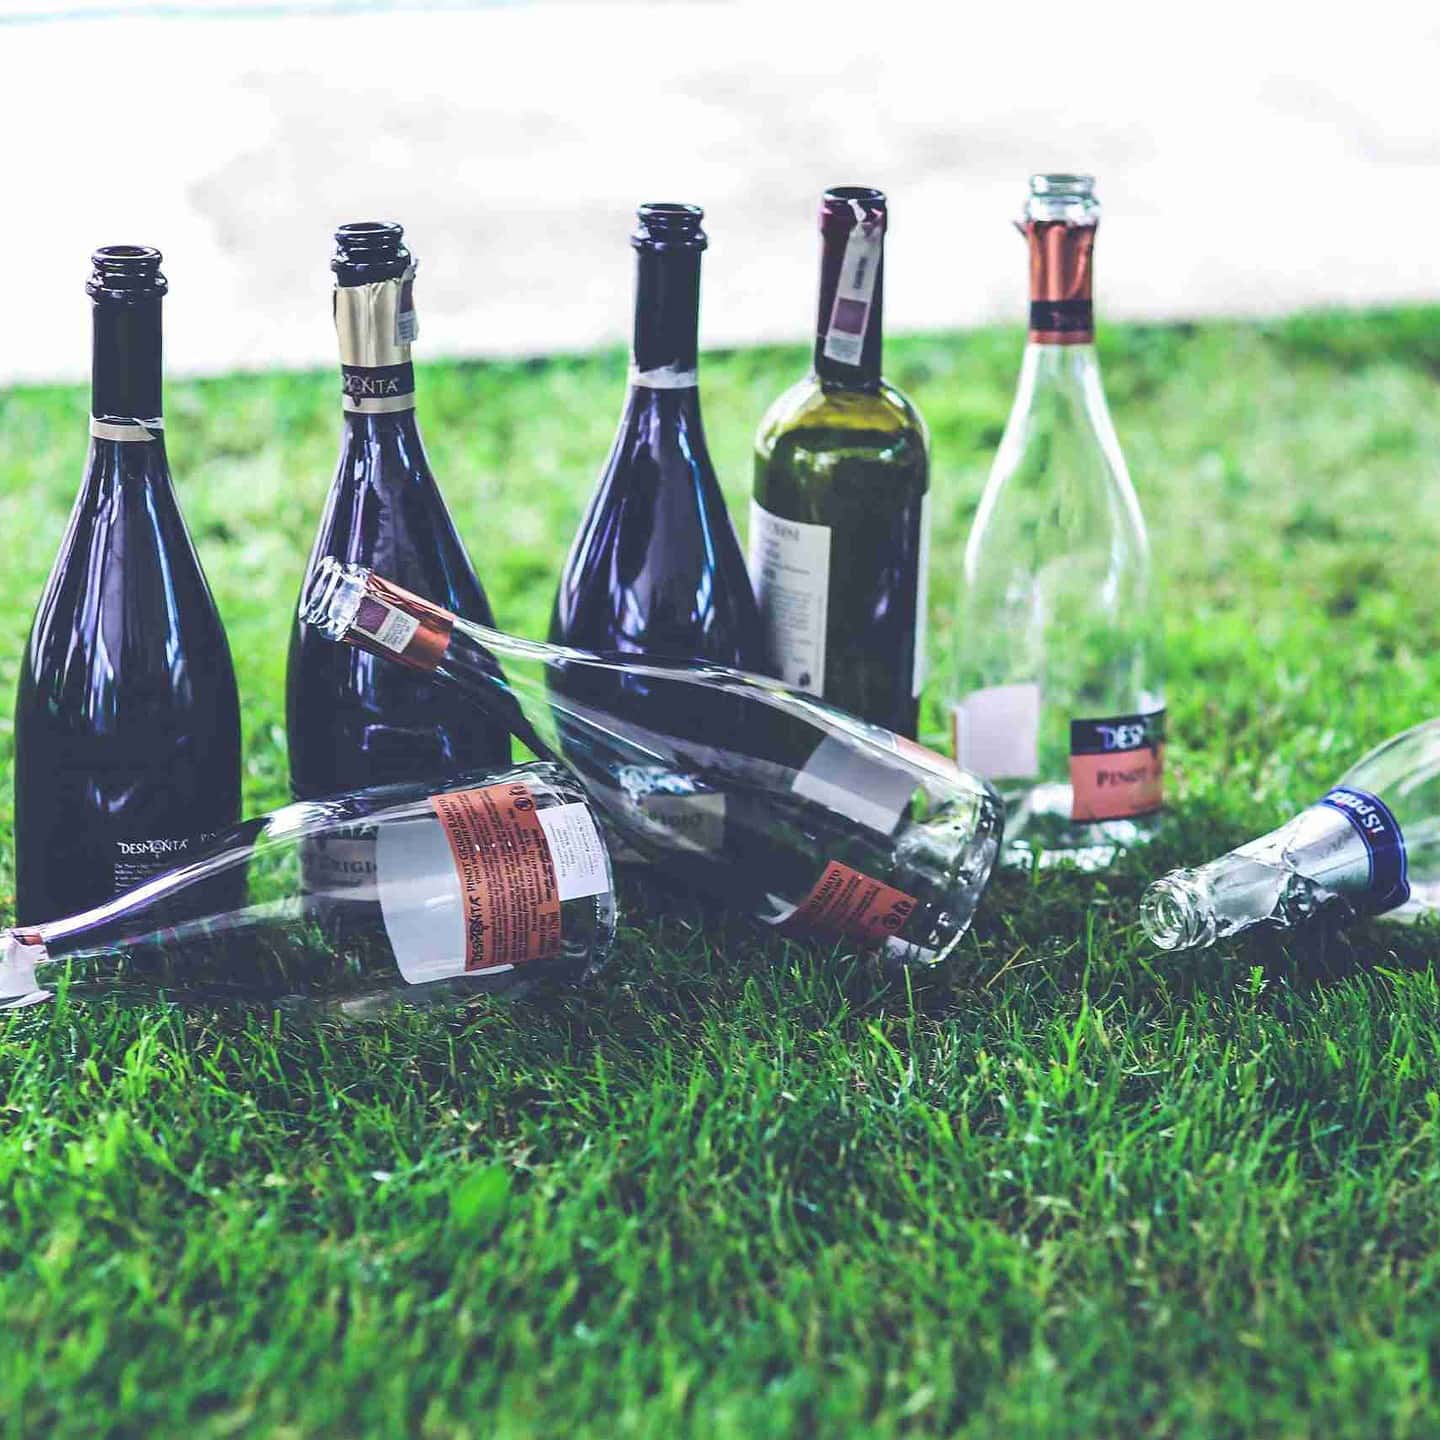 Treating Teen Substance Use - 8 empty glass alcohol bottles sit on the grass.